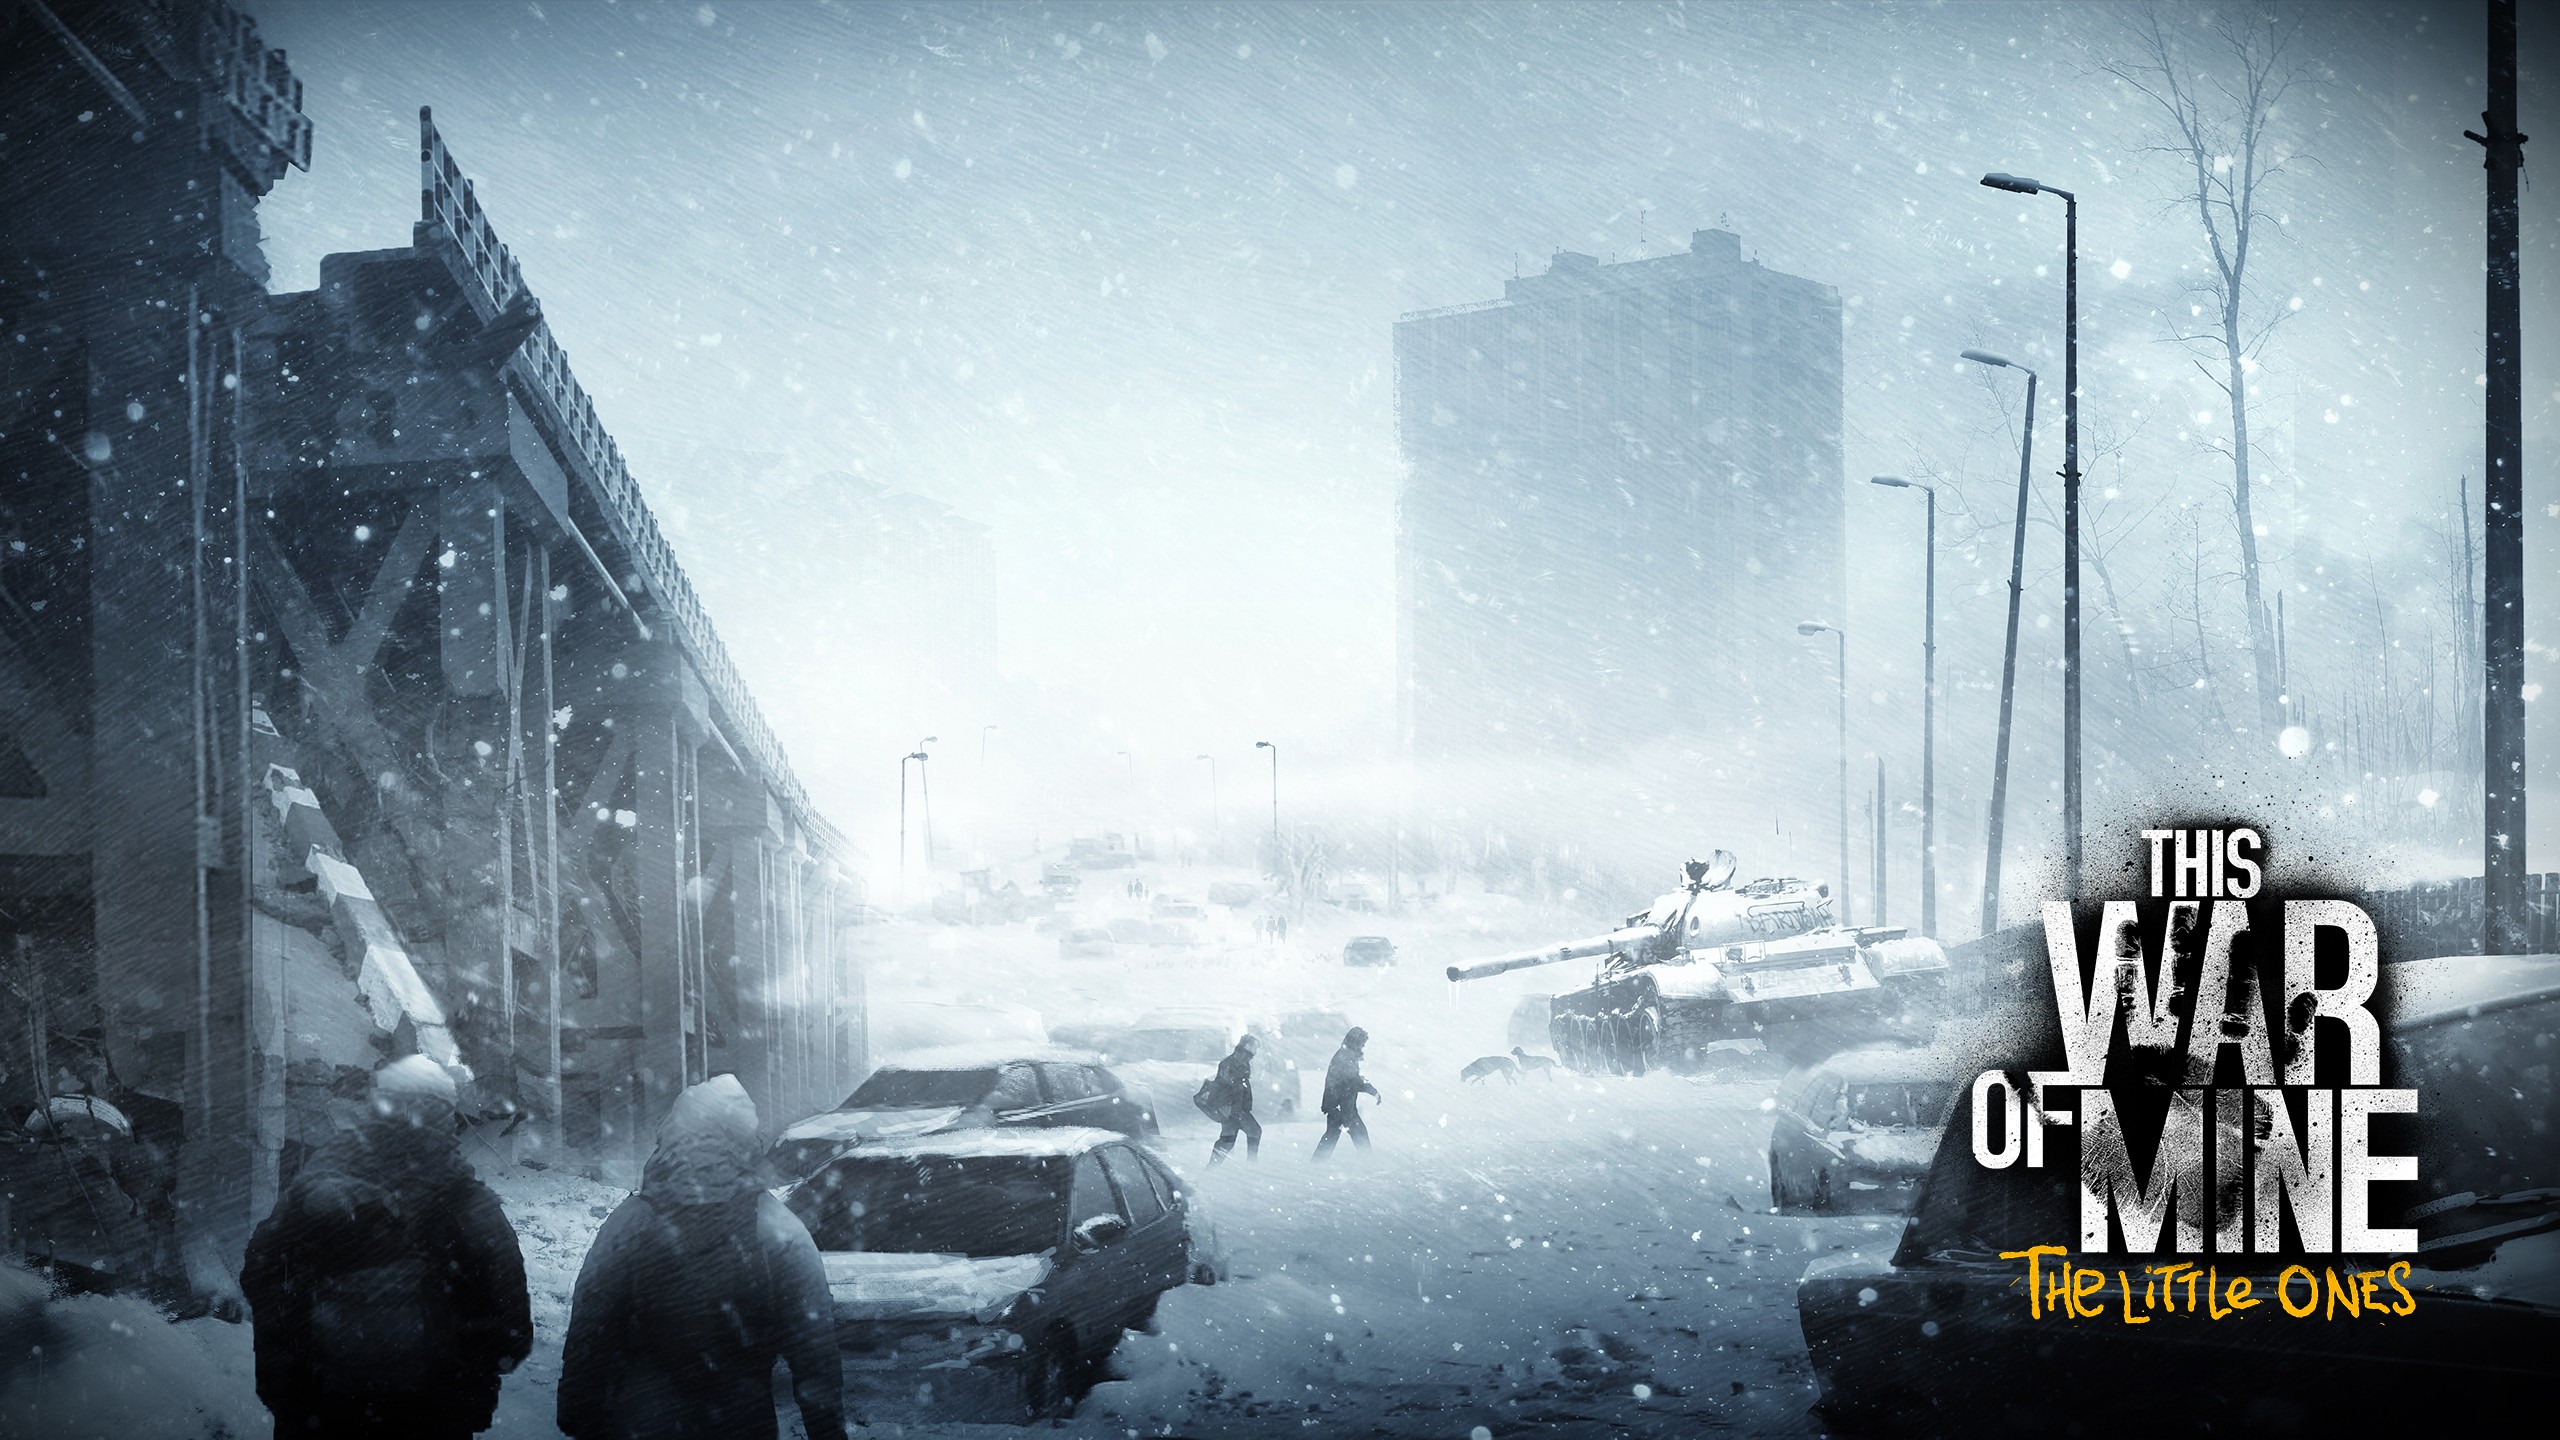 This War Of Mine Apocalyptic War This War Of Mine The Little Ones 2560x1440